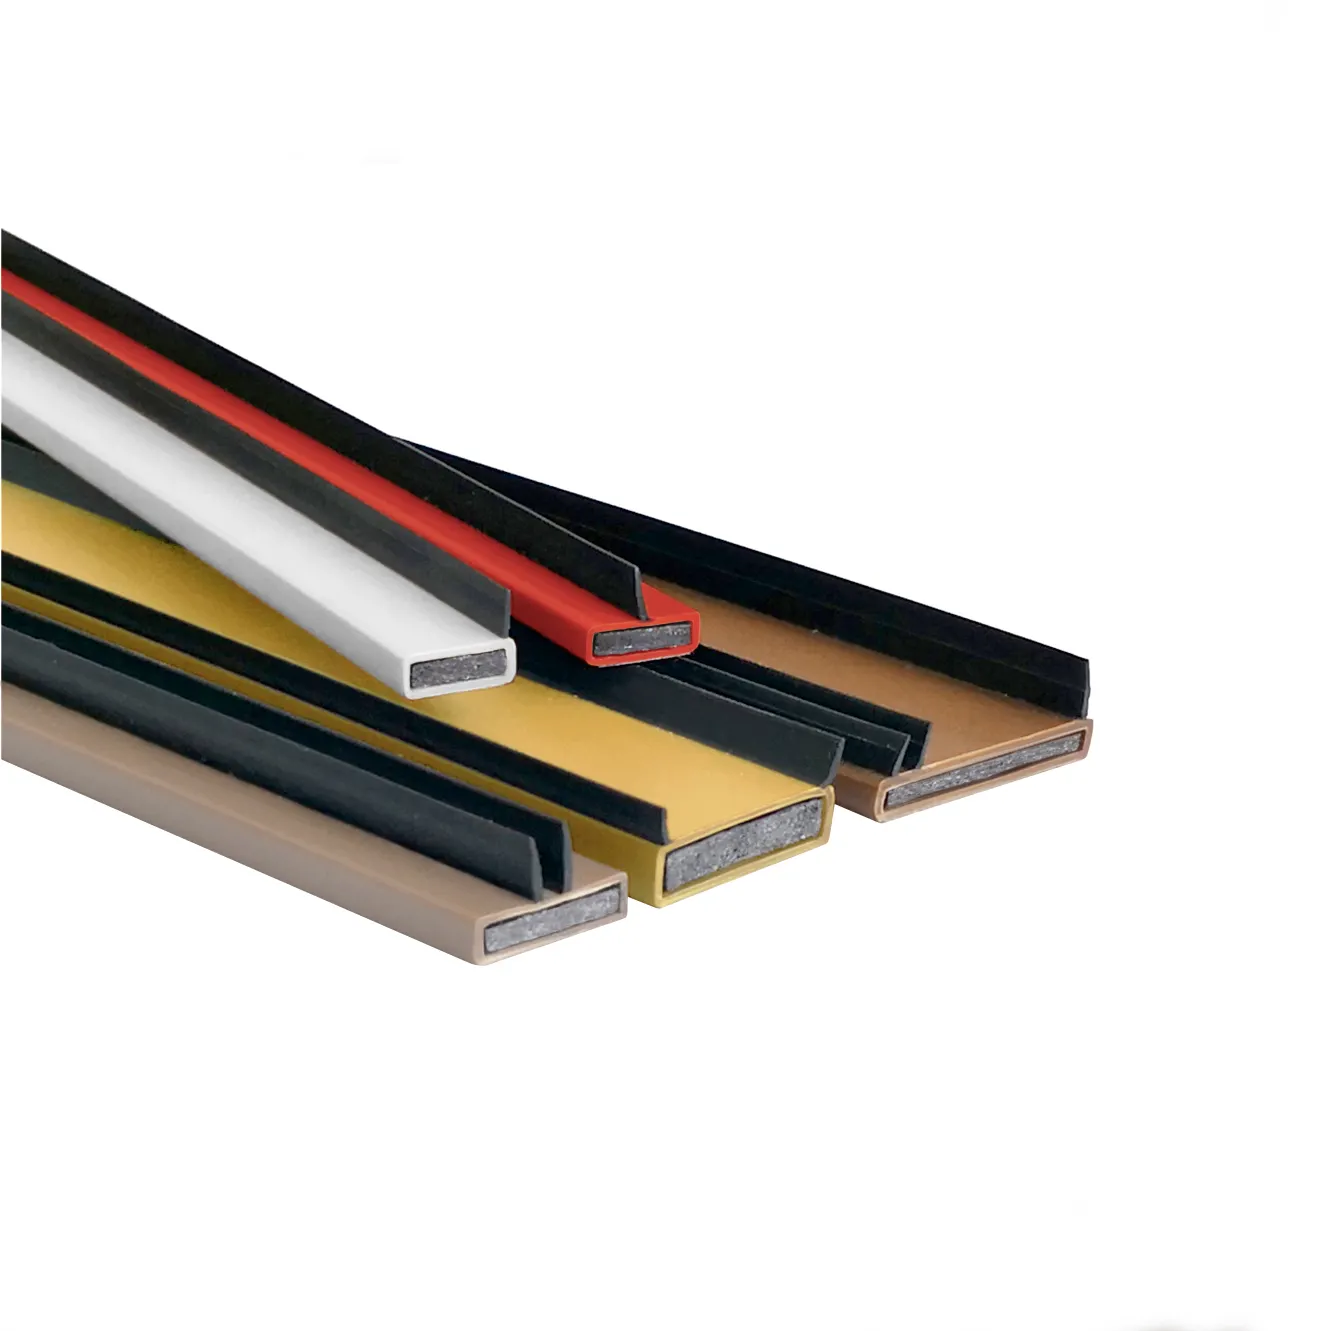 YZ1024 door seal fire seal adhesive strips with certifire high quality